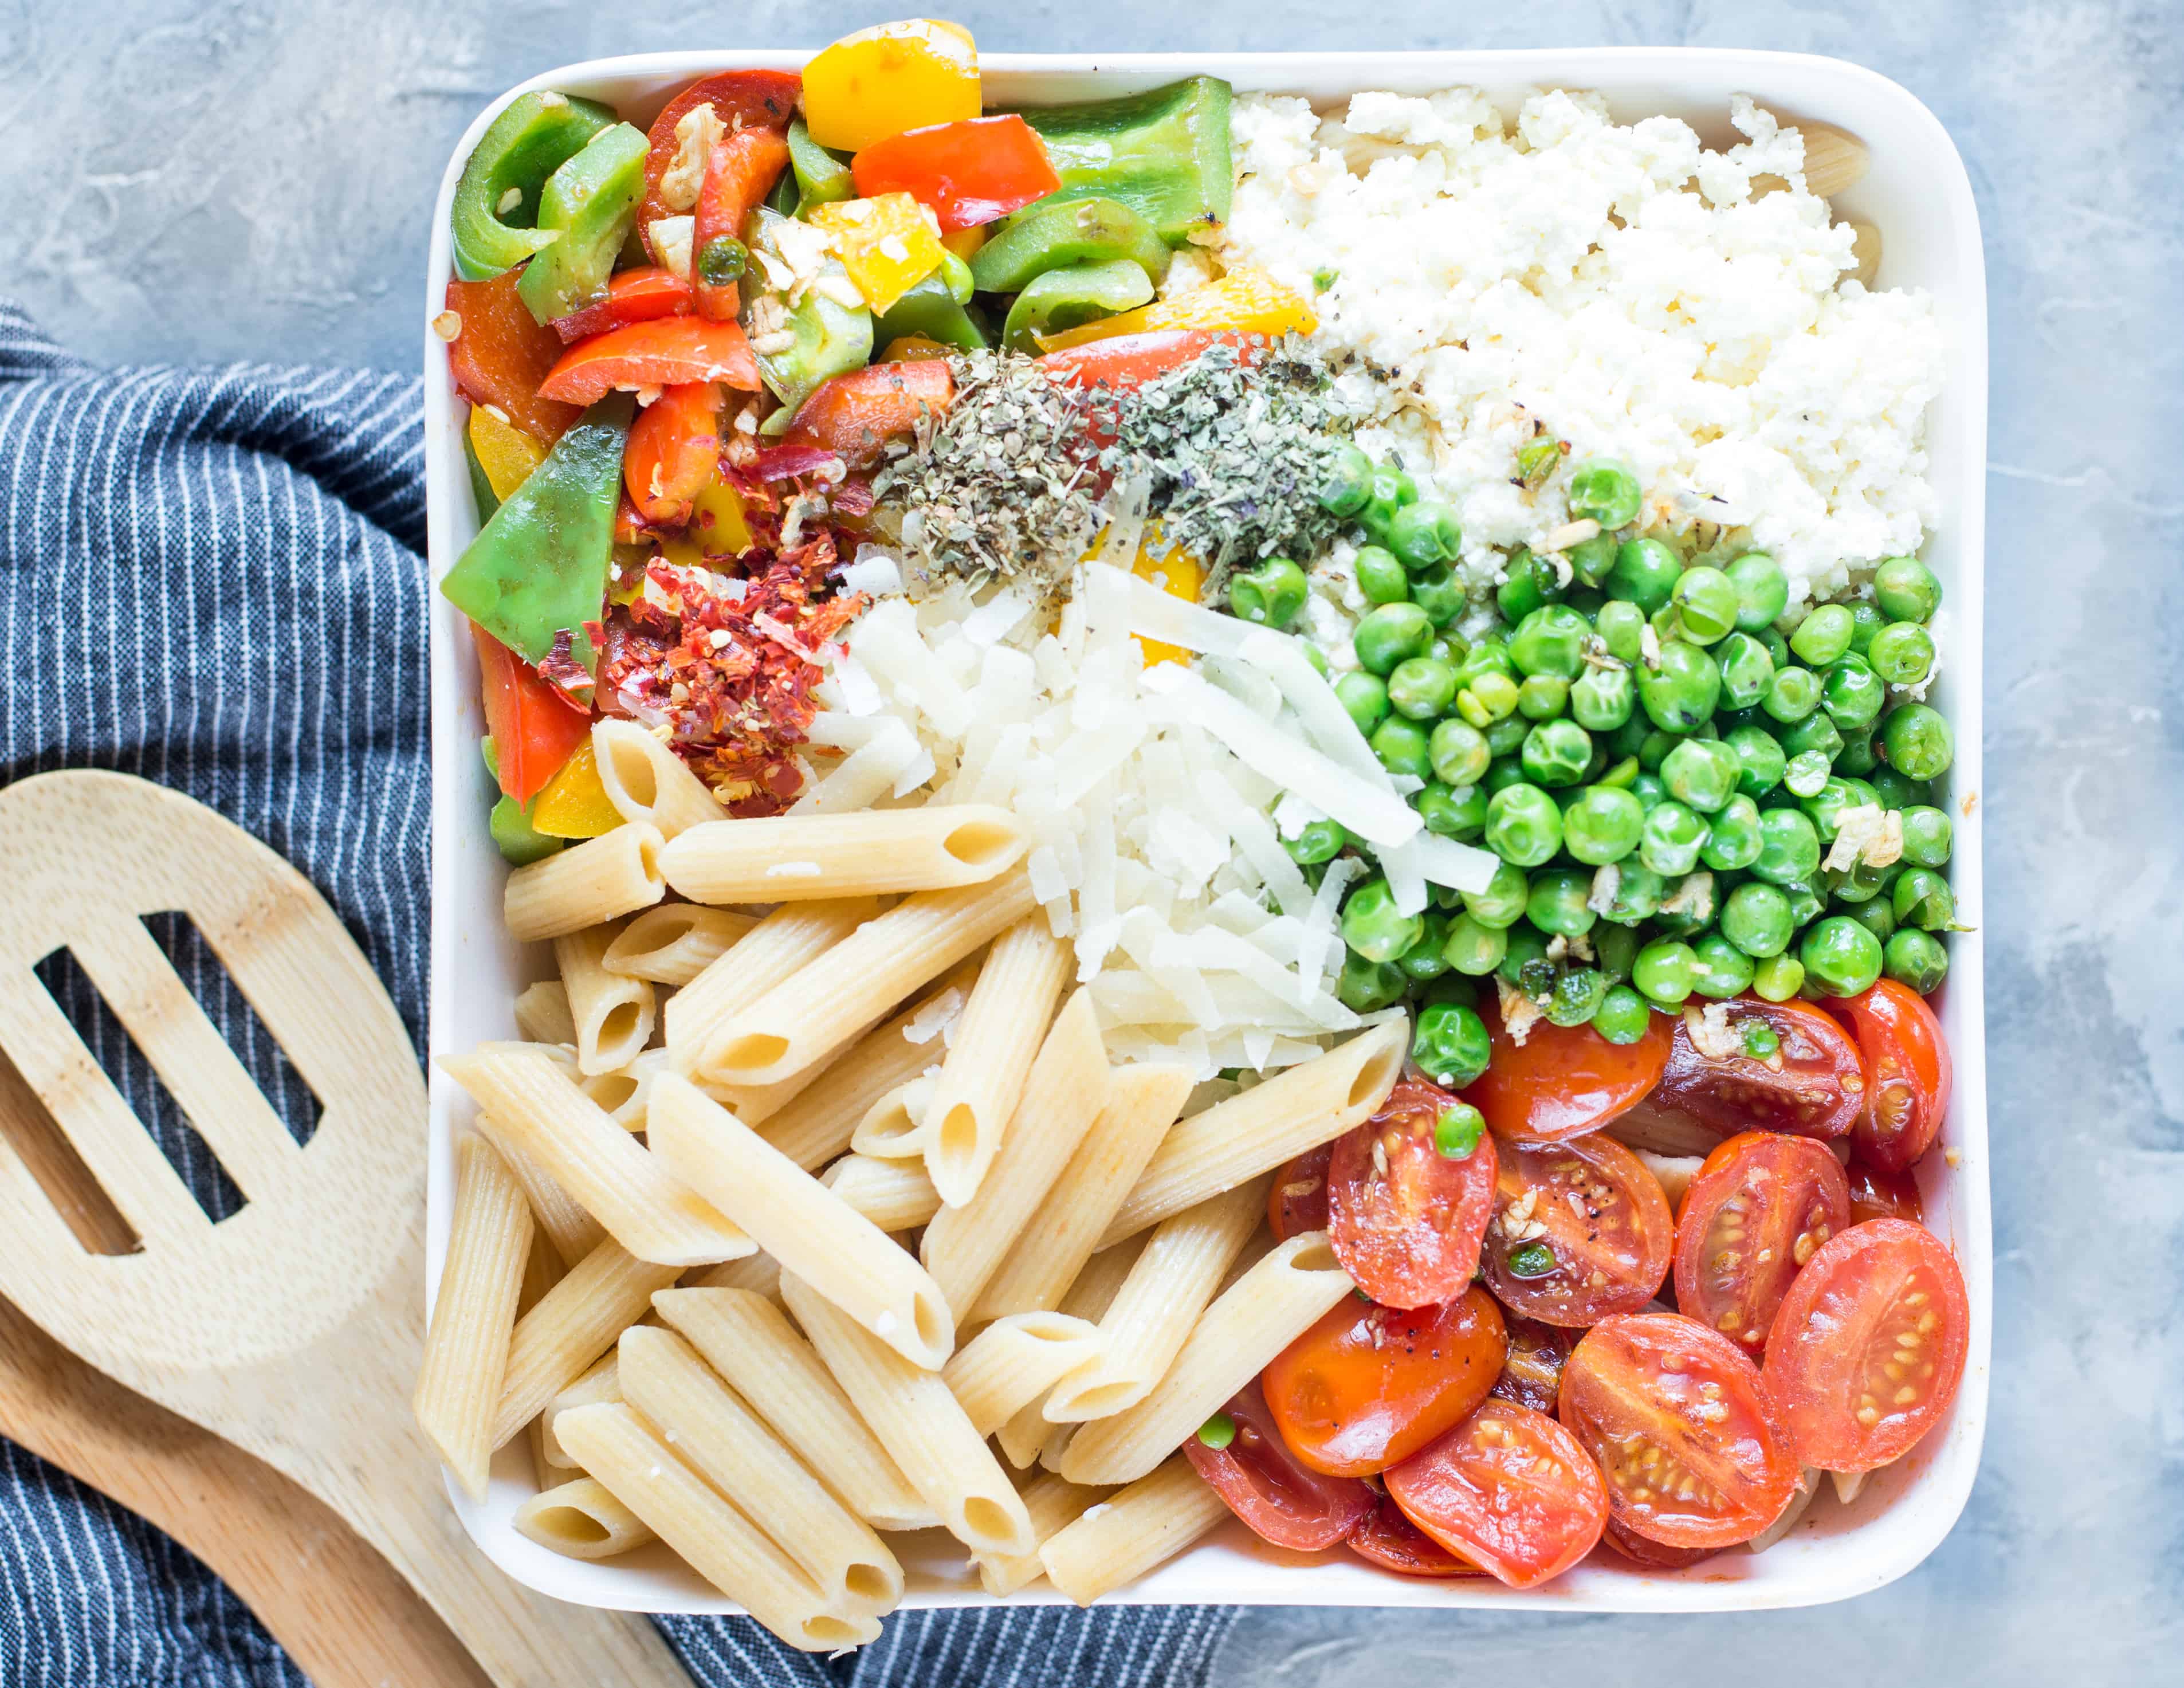 Ingredients include pasta, veggies, peas and cheese for making cold pasta salad.